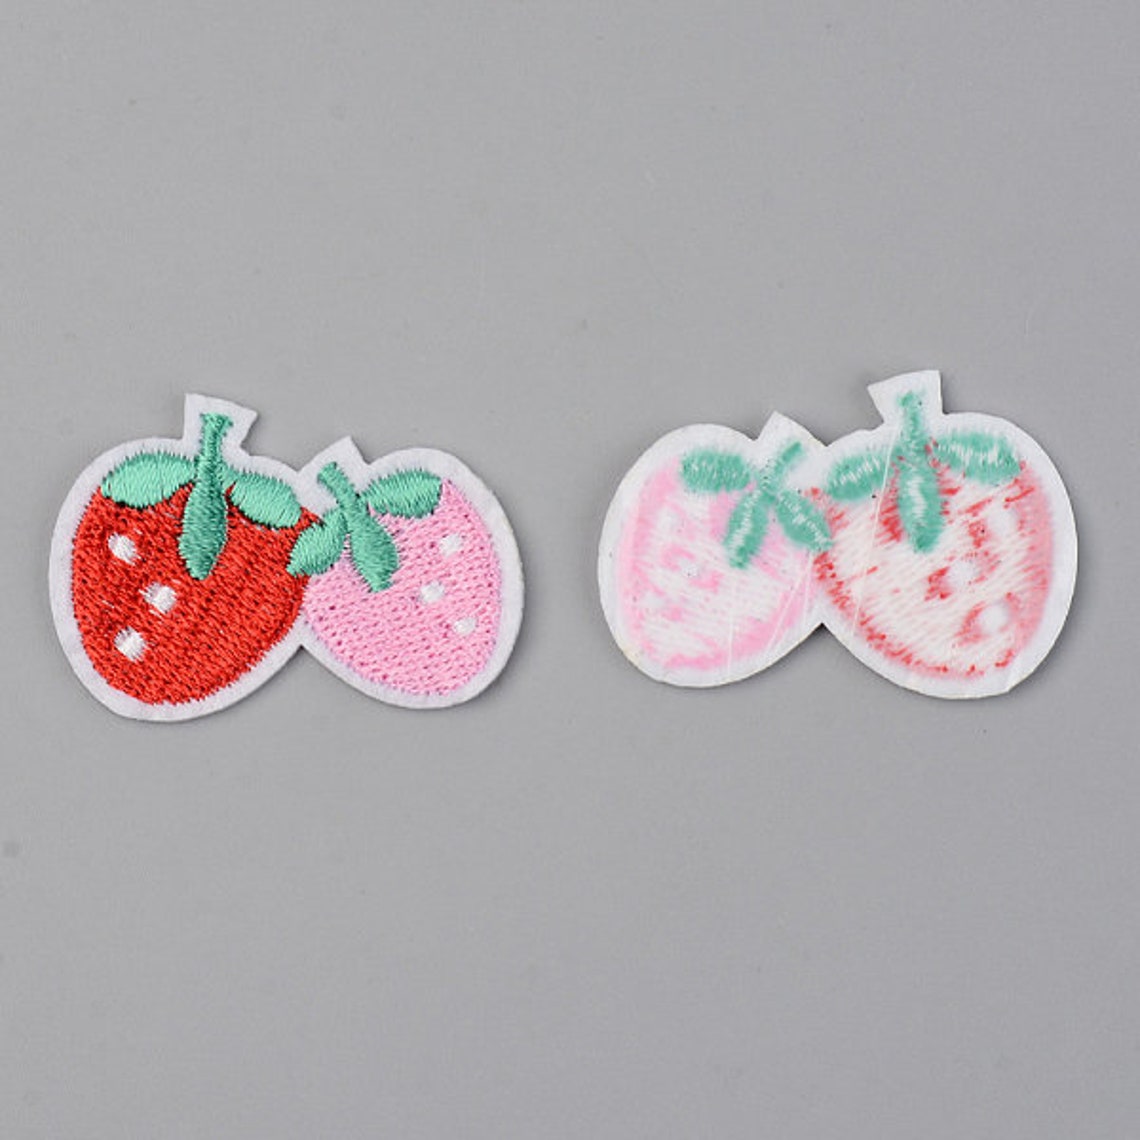 Strawberry iron on patches iron on patches embroidered fruit | Etsy